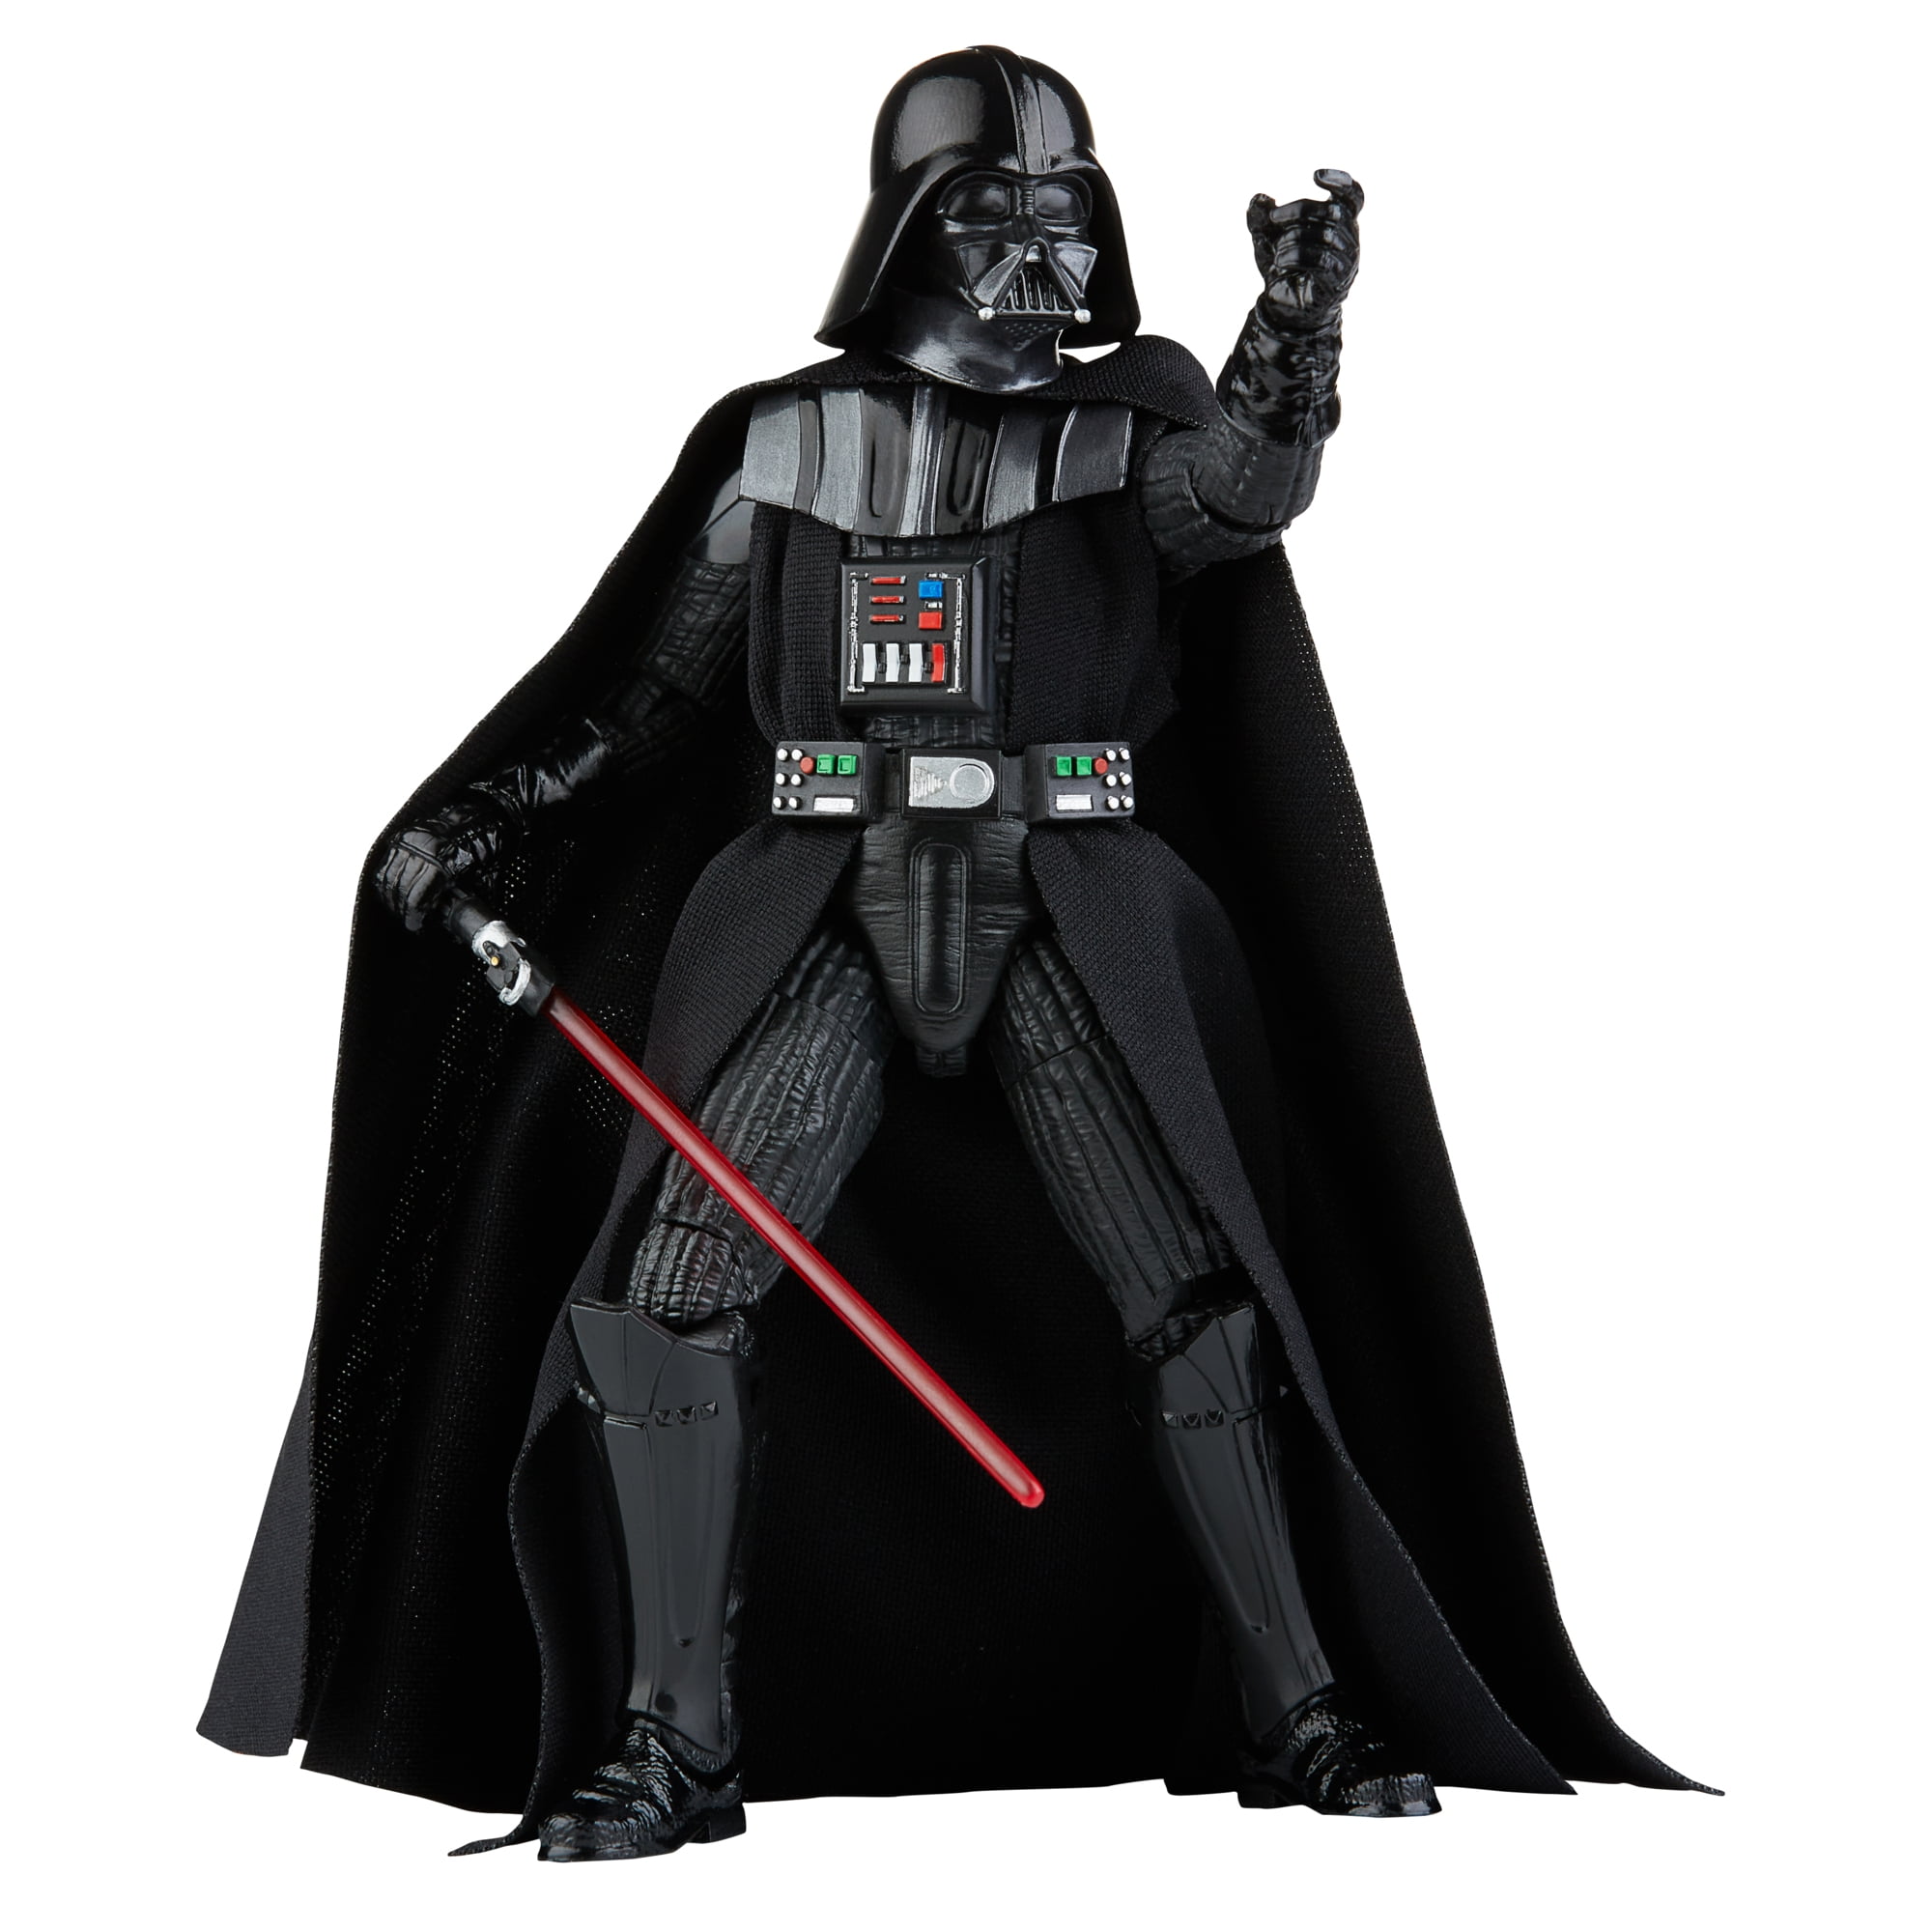 Hasbro Star Wars Collector Series Darth Vader Action Figure for sale online 